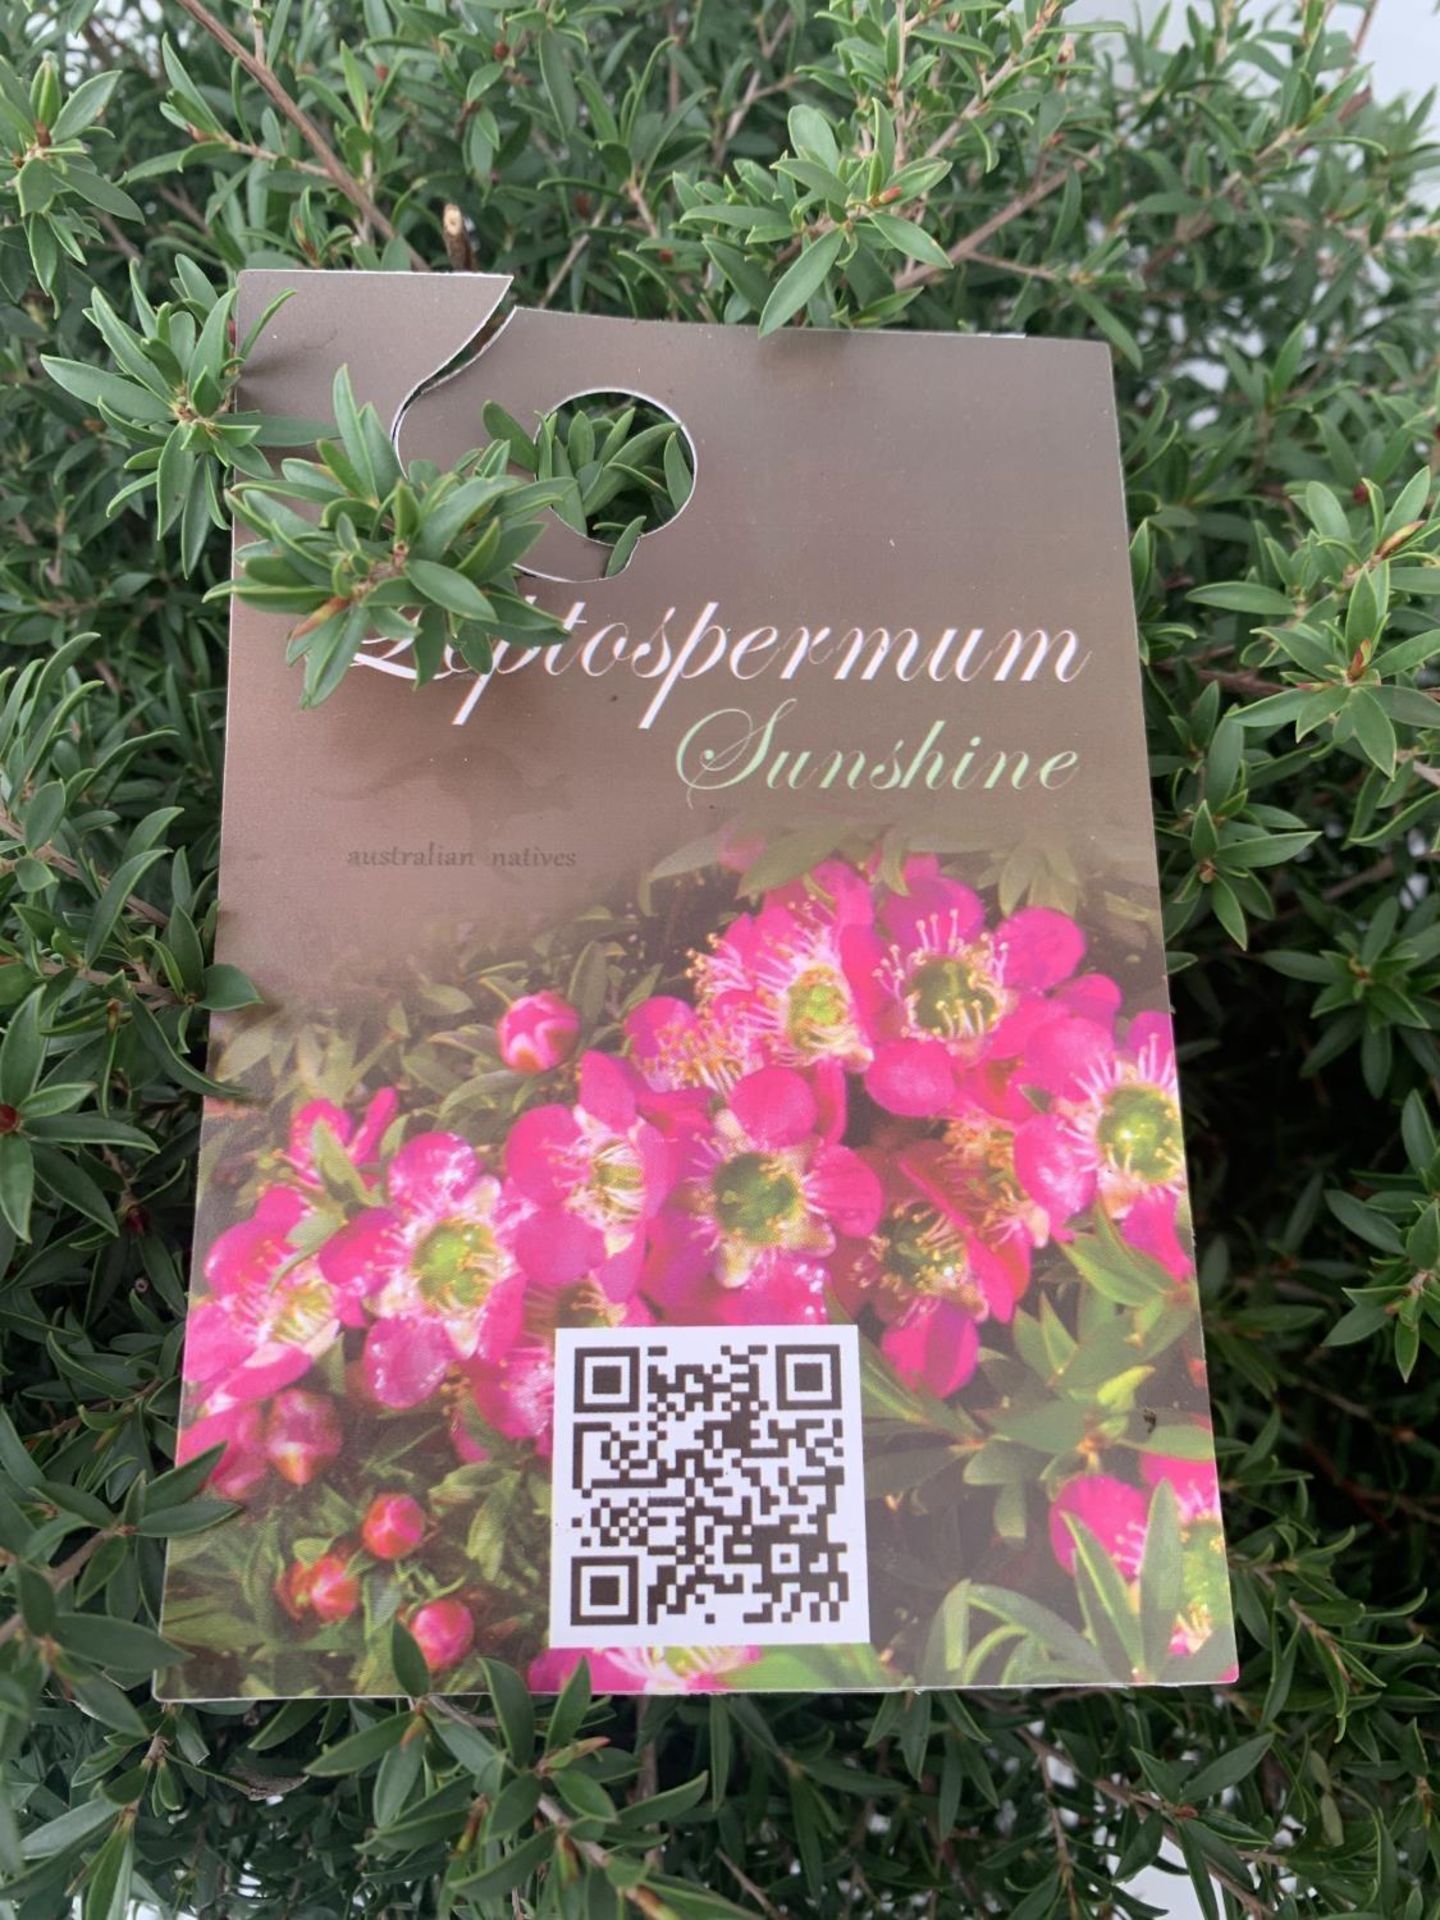 TWO LEPTOSPERMUM 'SUNSHINE' PINK SHRUBS APPROX 60CM IN HEIGHT IN FIVE LTR POTS PLUS VAT TO BE SOLD - Bild 8 aus 8